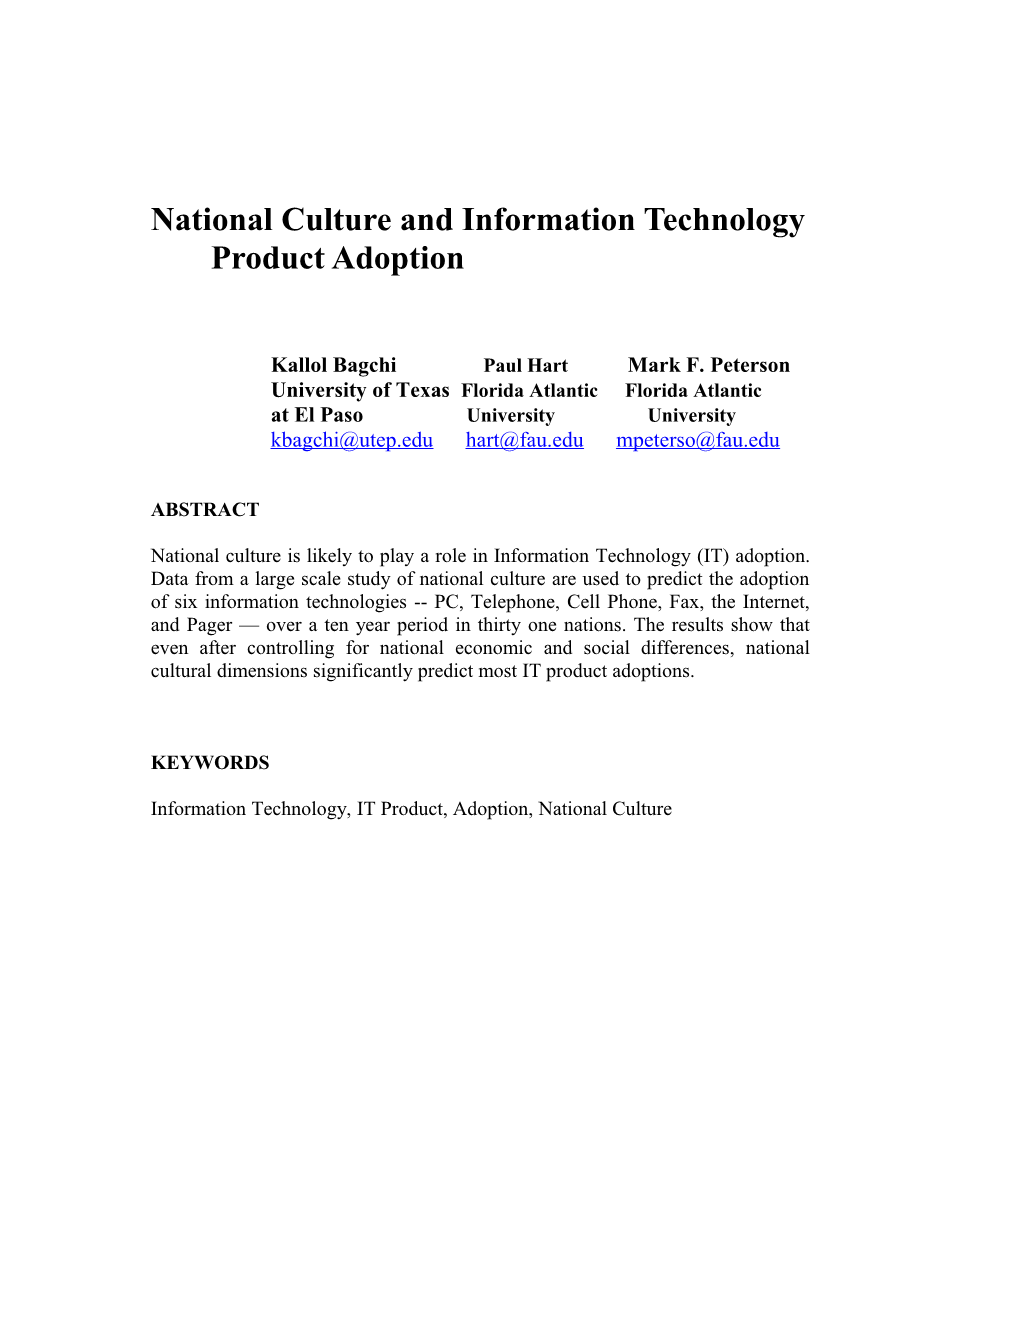 National Culture and Information Technology Product Adoption